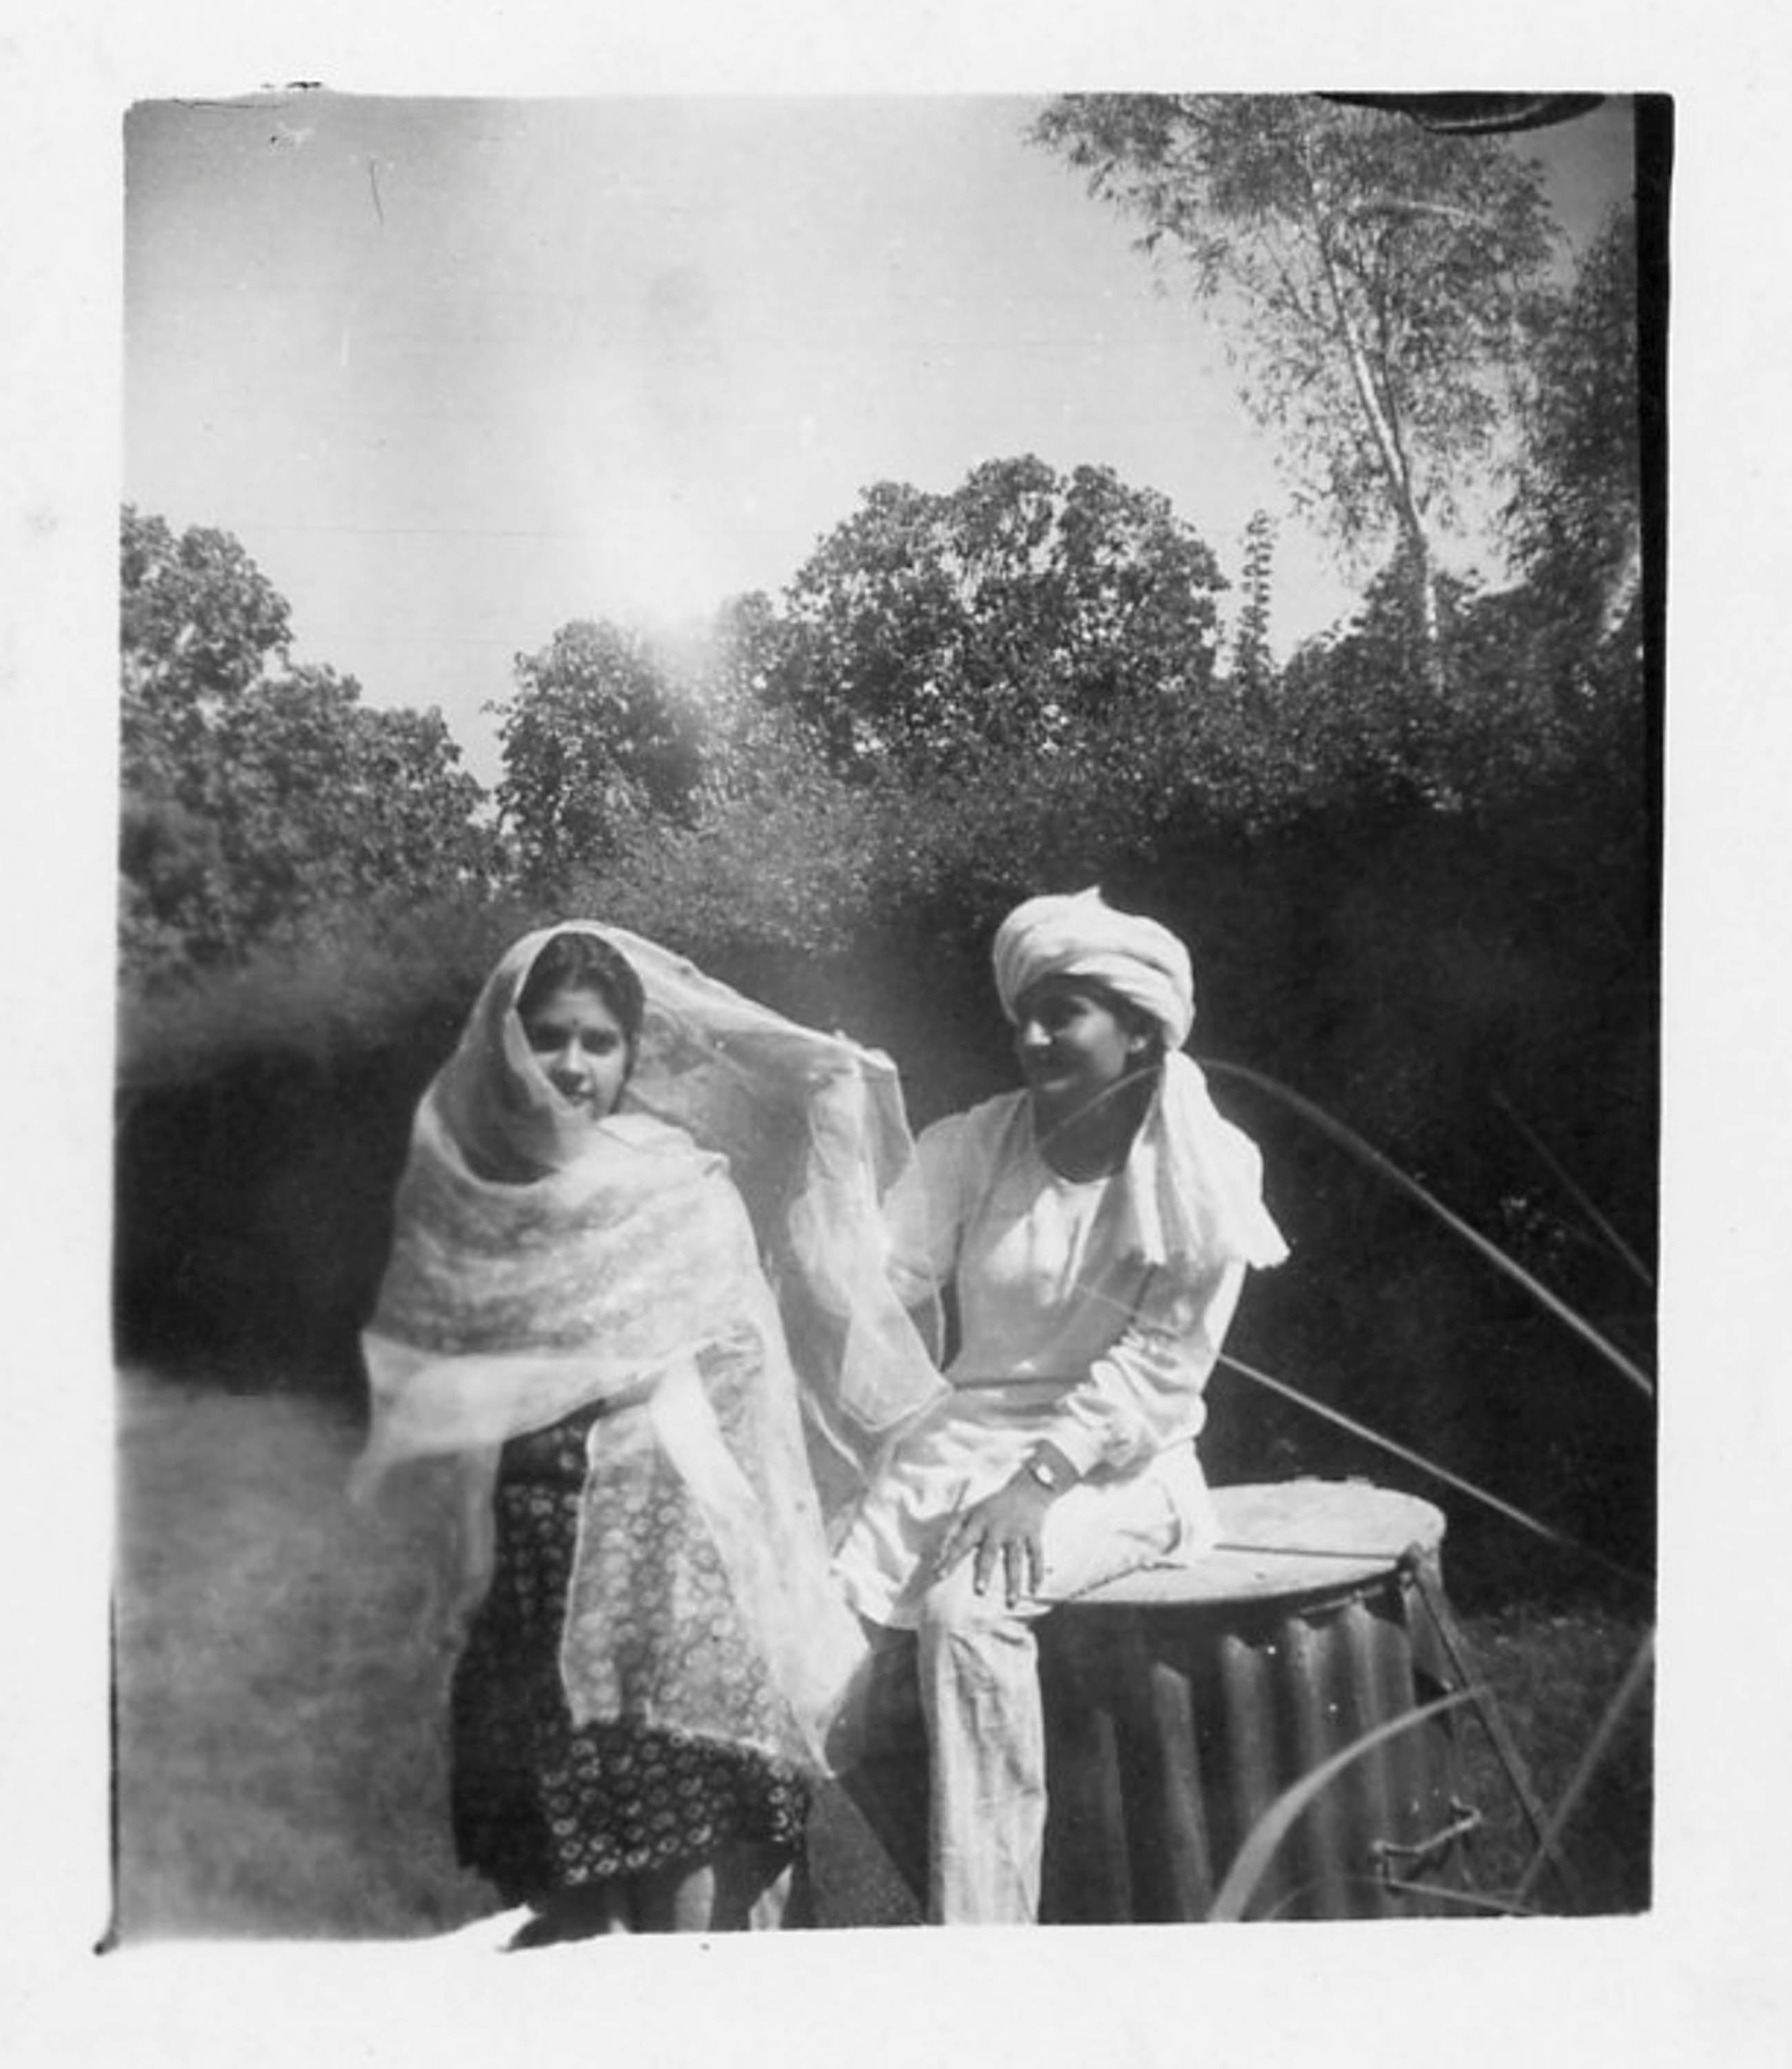 Black and white image of a young man and woman in a garden, in India. She wears a fine shawl around her head and shoulders, he wears white scarf around his head